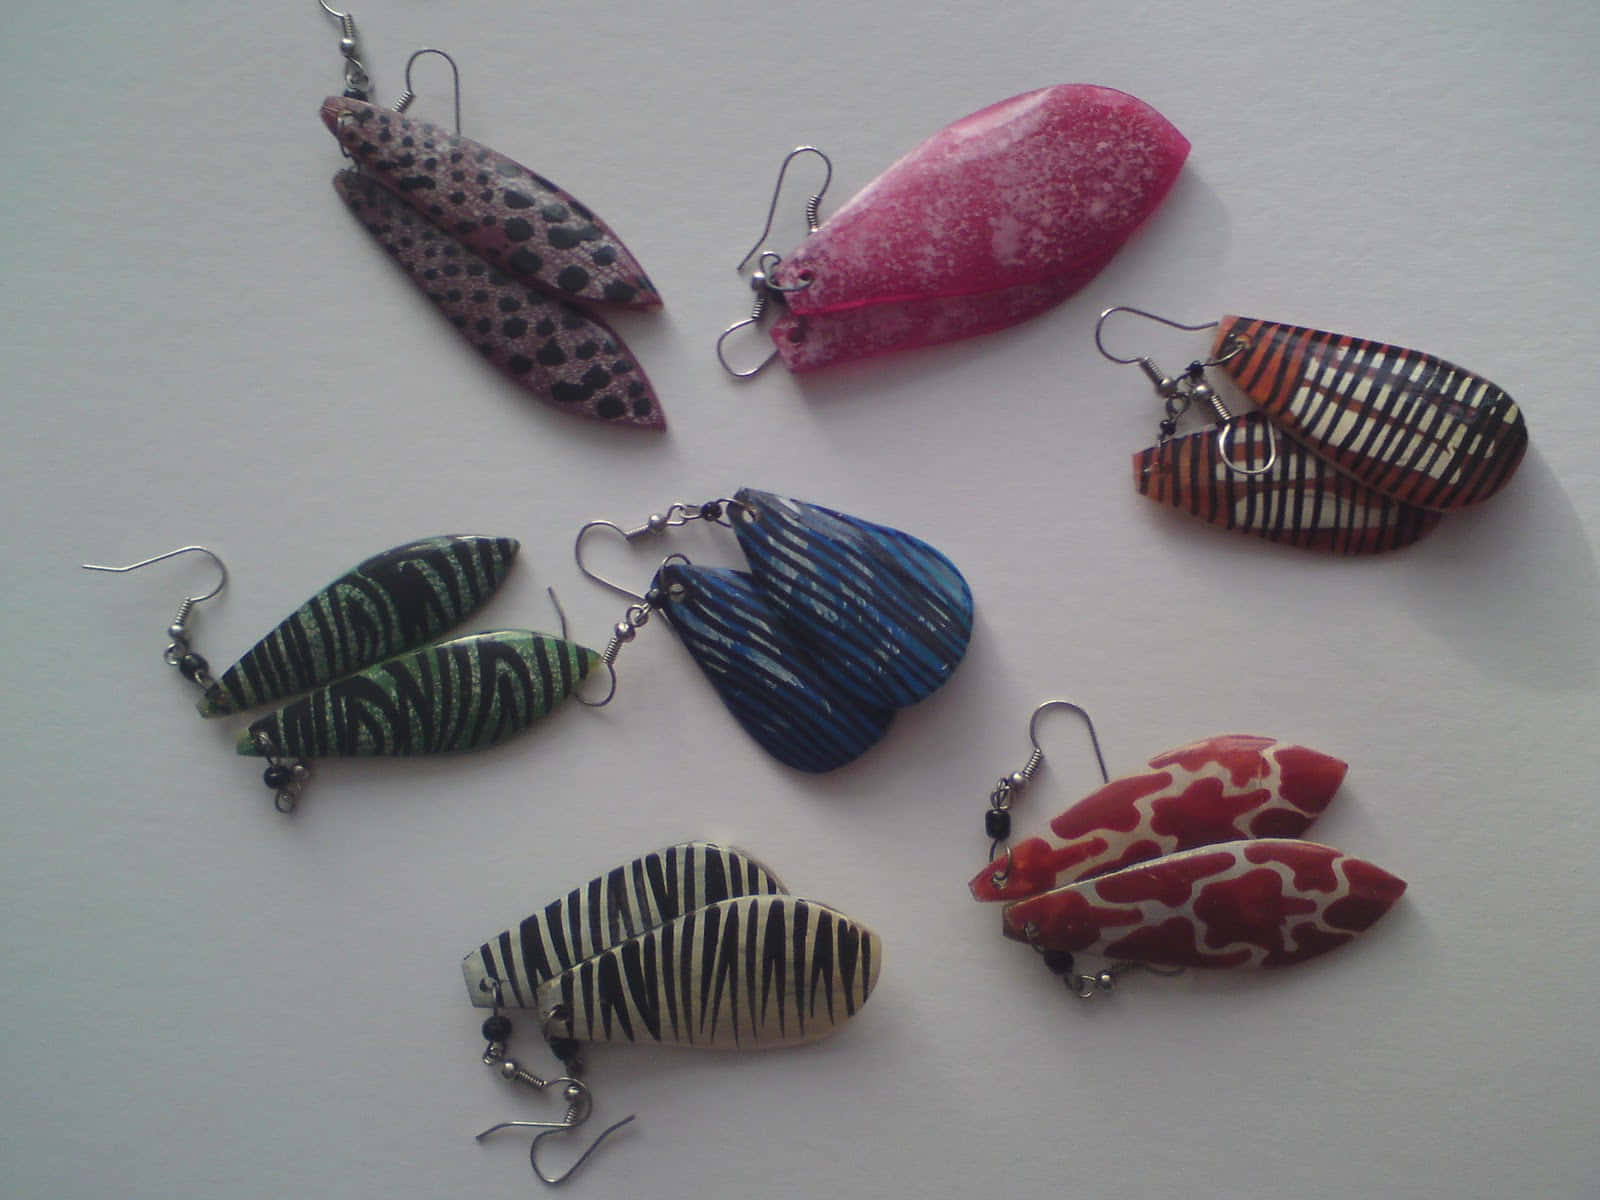 A Group Of Earrings With Different Colored Designs